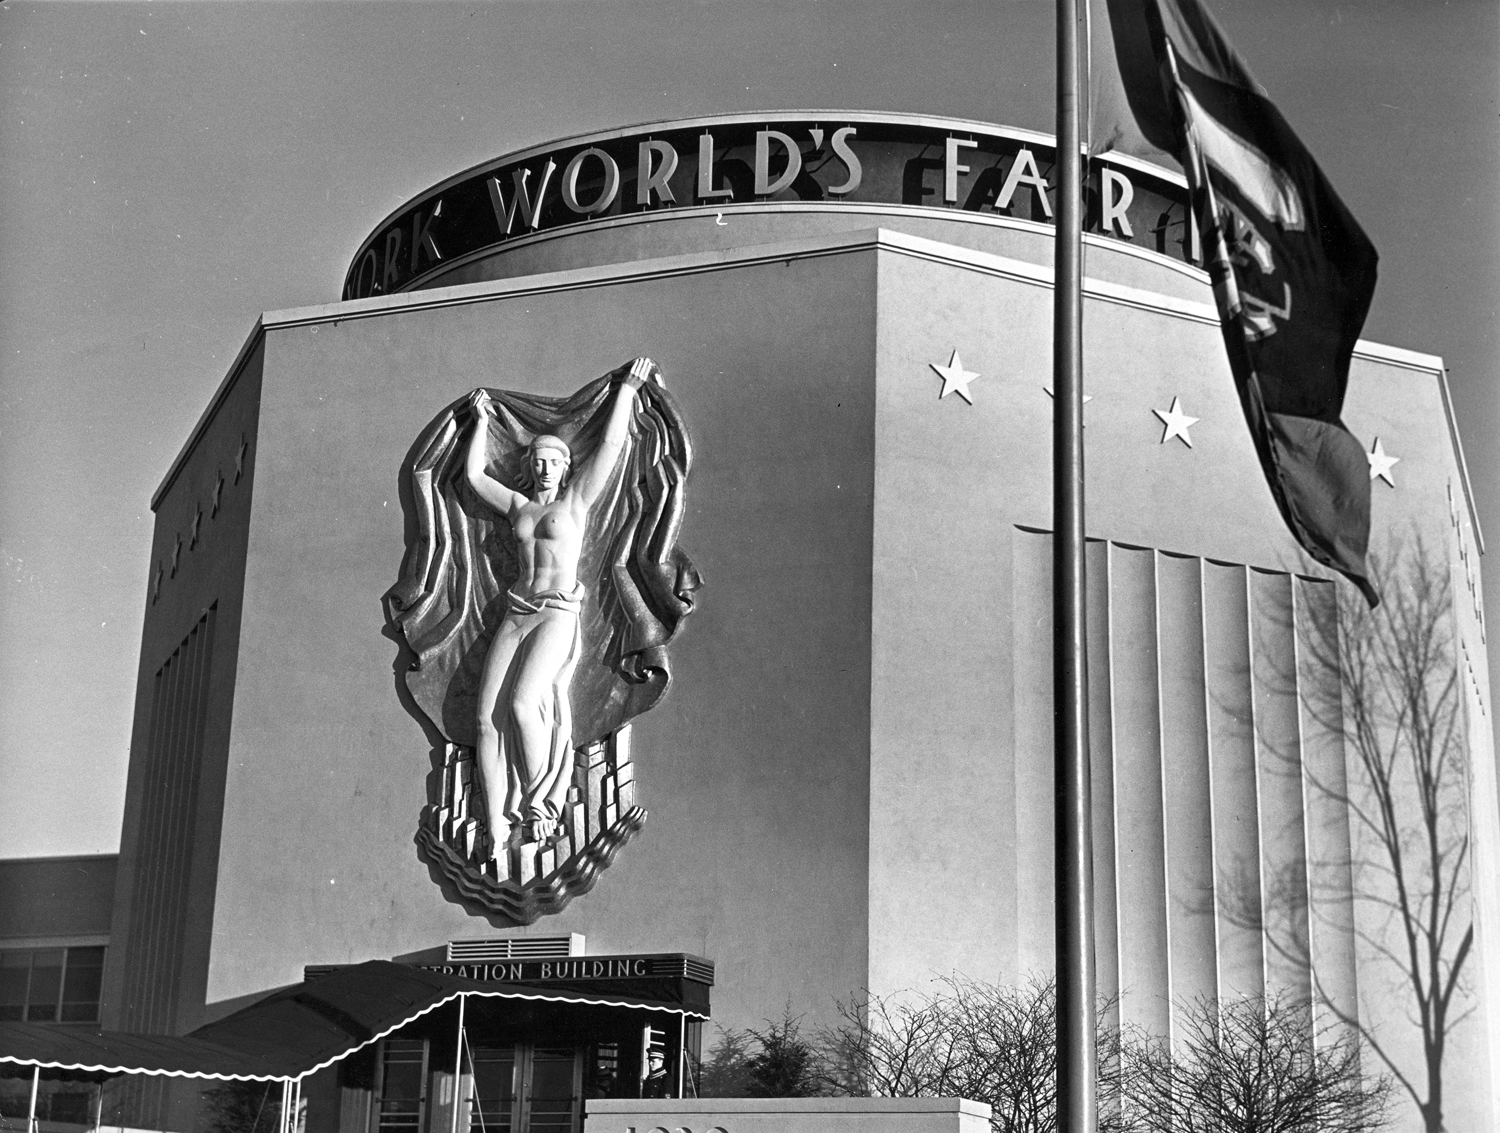 Exterior view of the Administration Building for the 1939-1940 New York World's Fair.